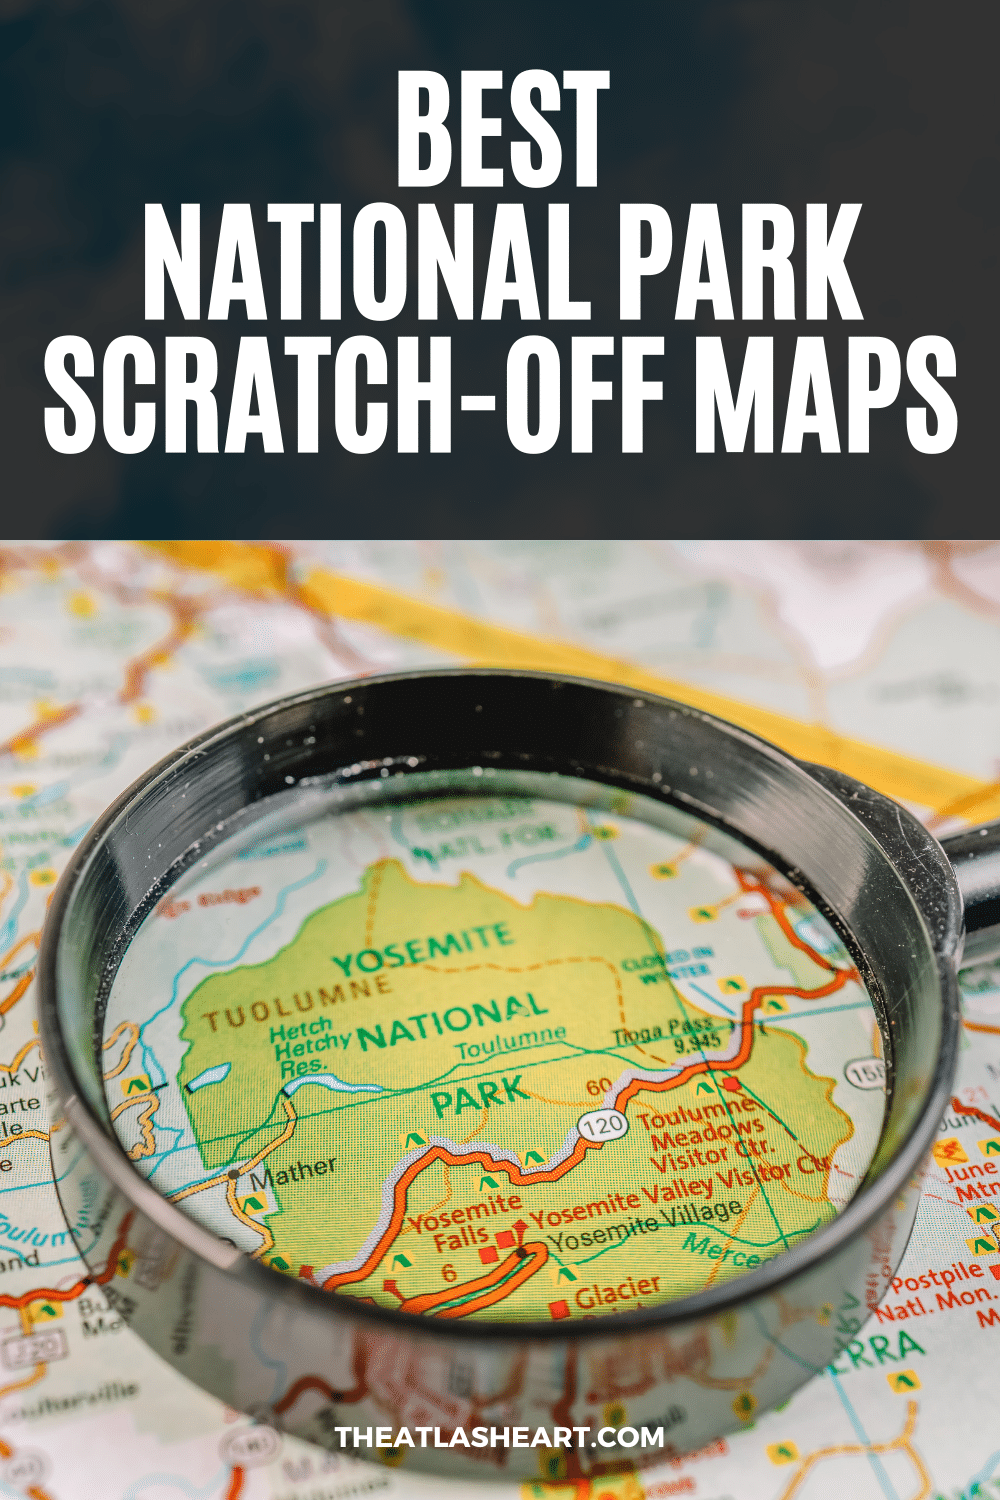 12 Best National Park Scratch-Off Maps for the Park Enthusiast in 2022